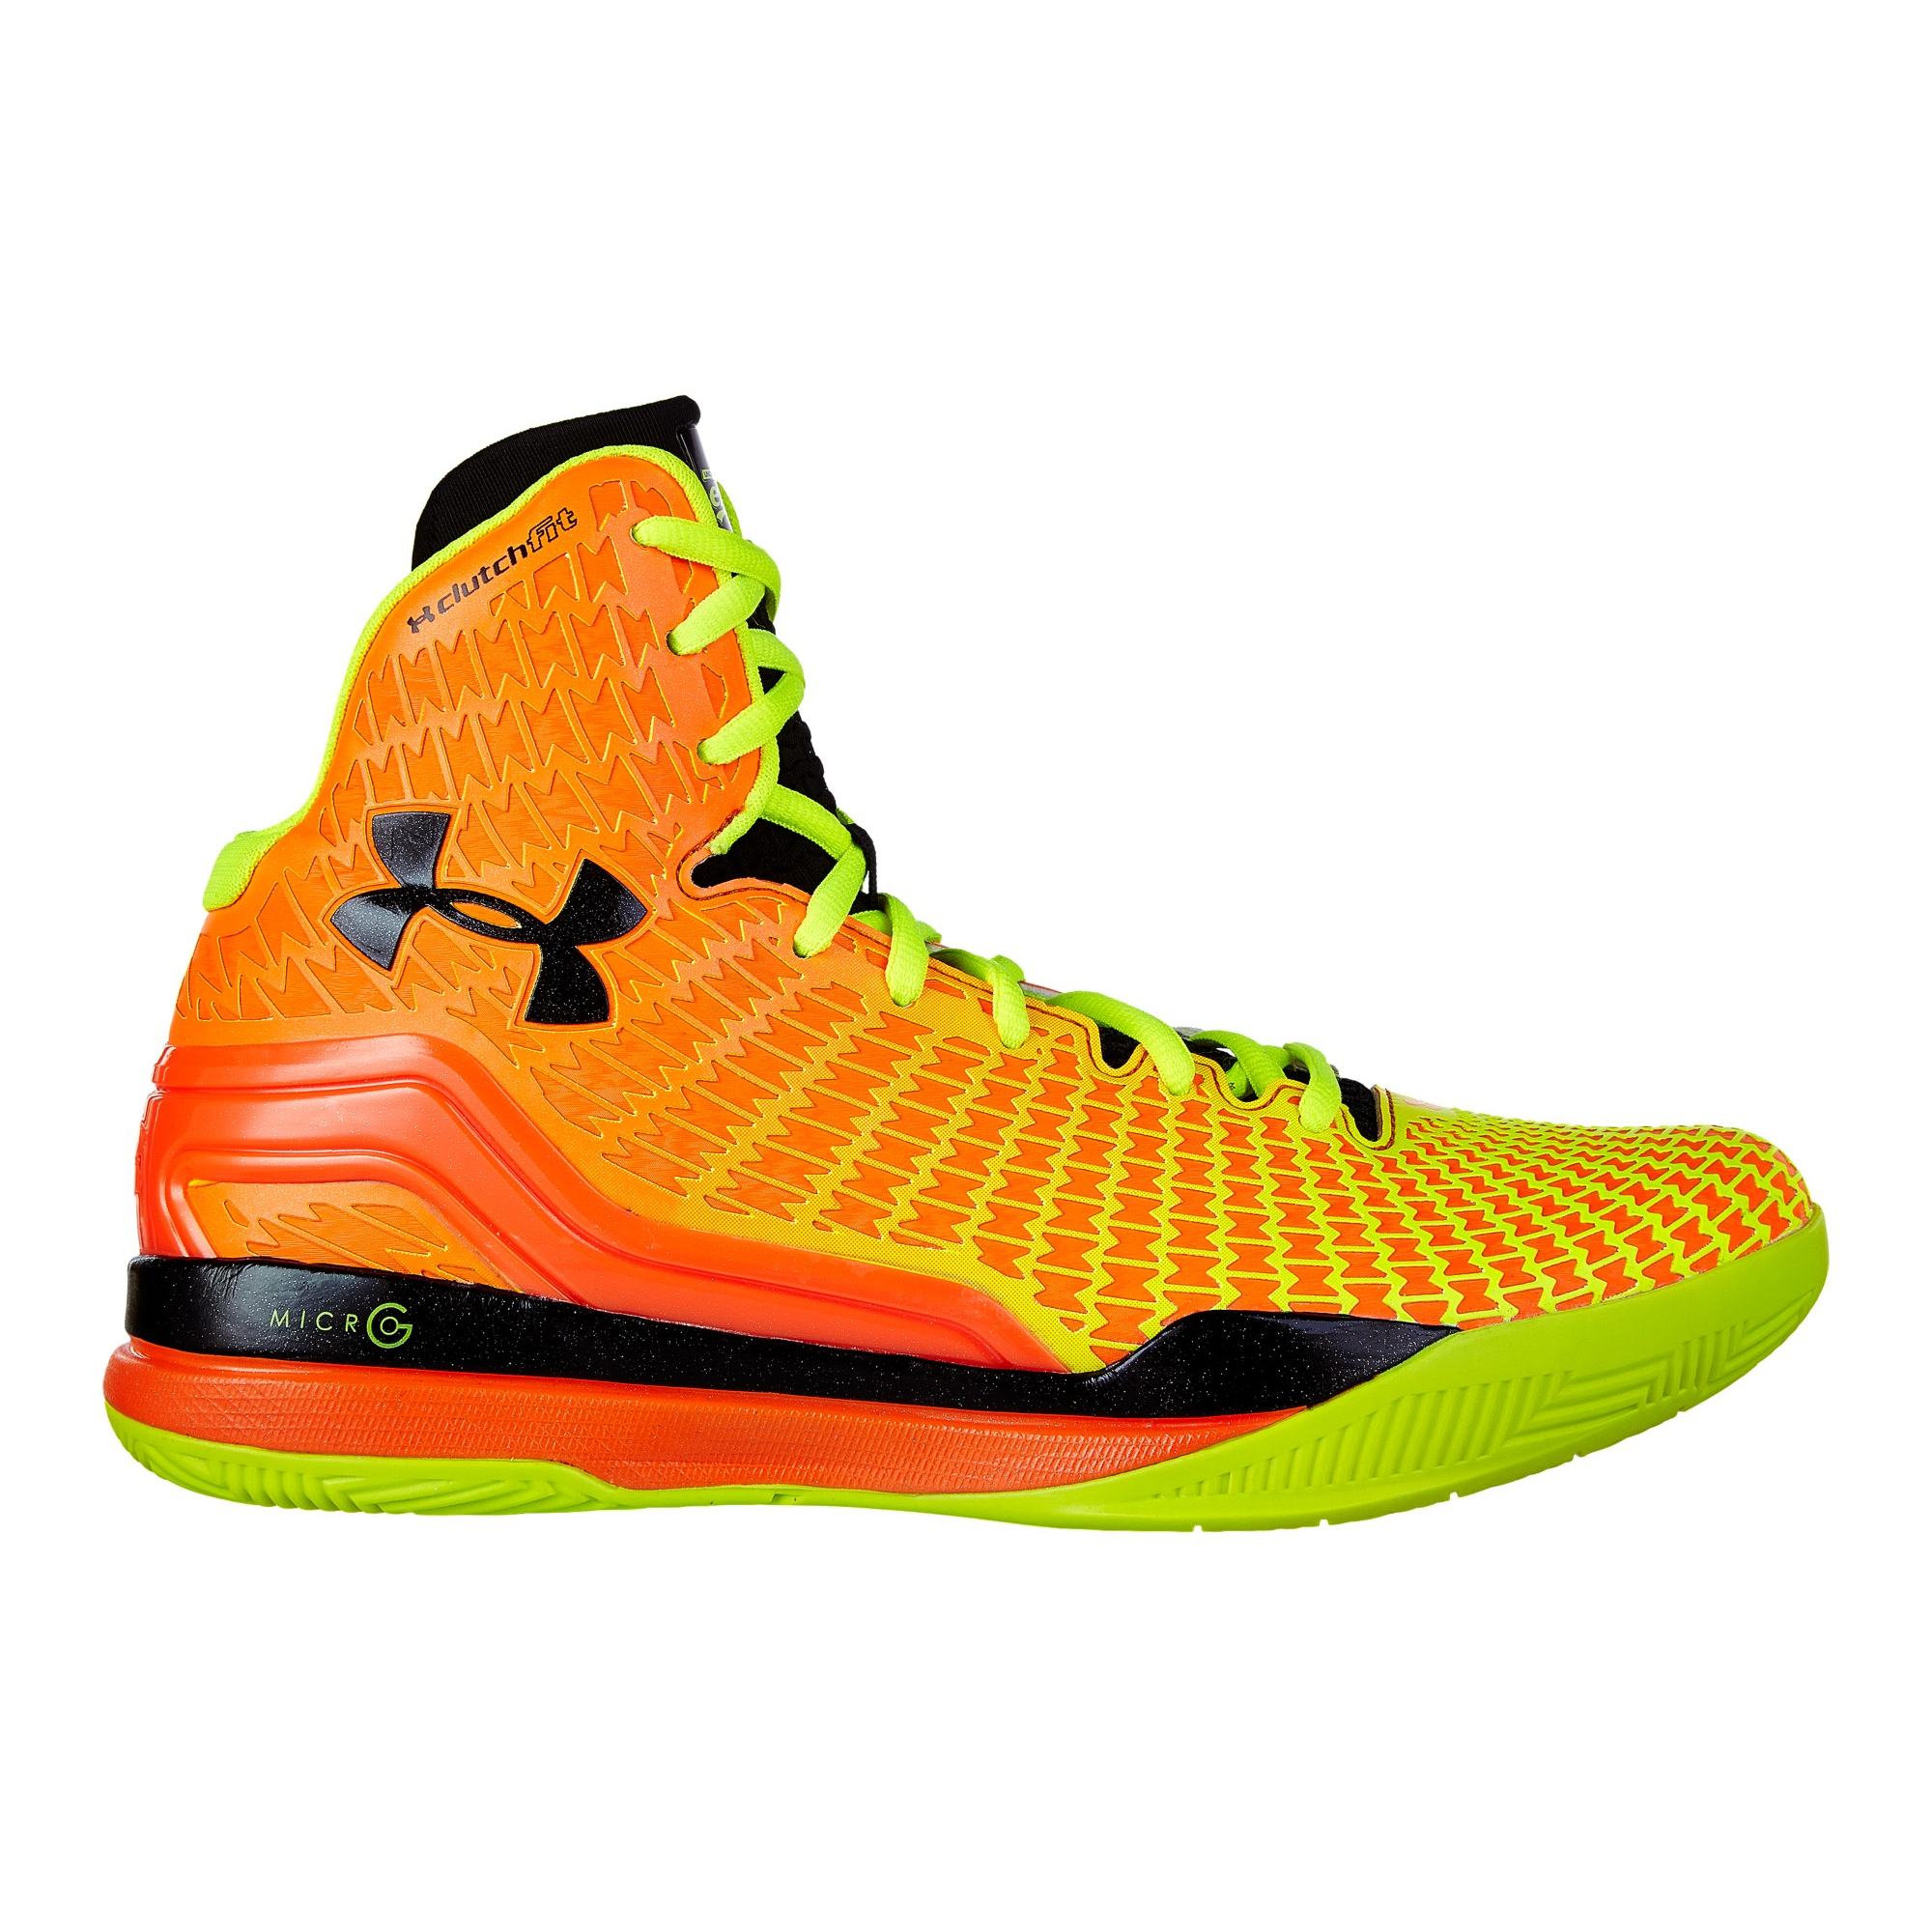 Under Armour Curry 2 Boys' Toddler Basketball Kids